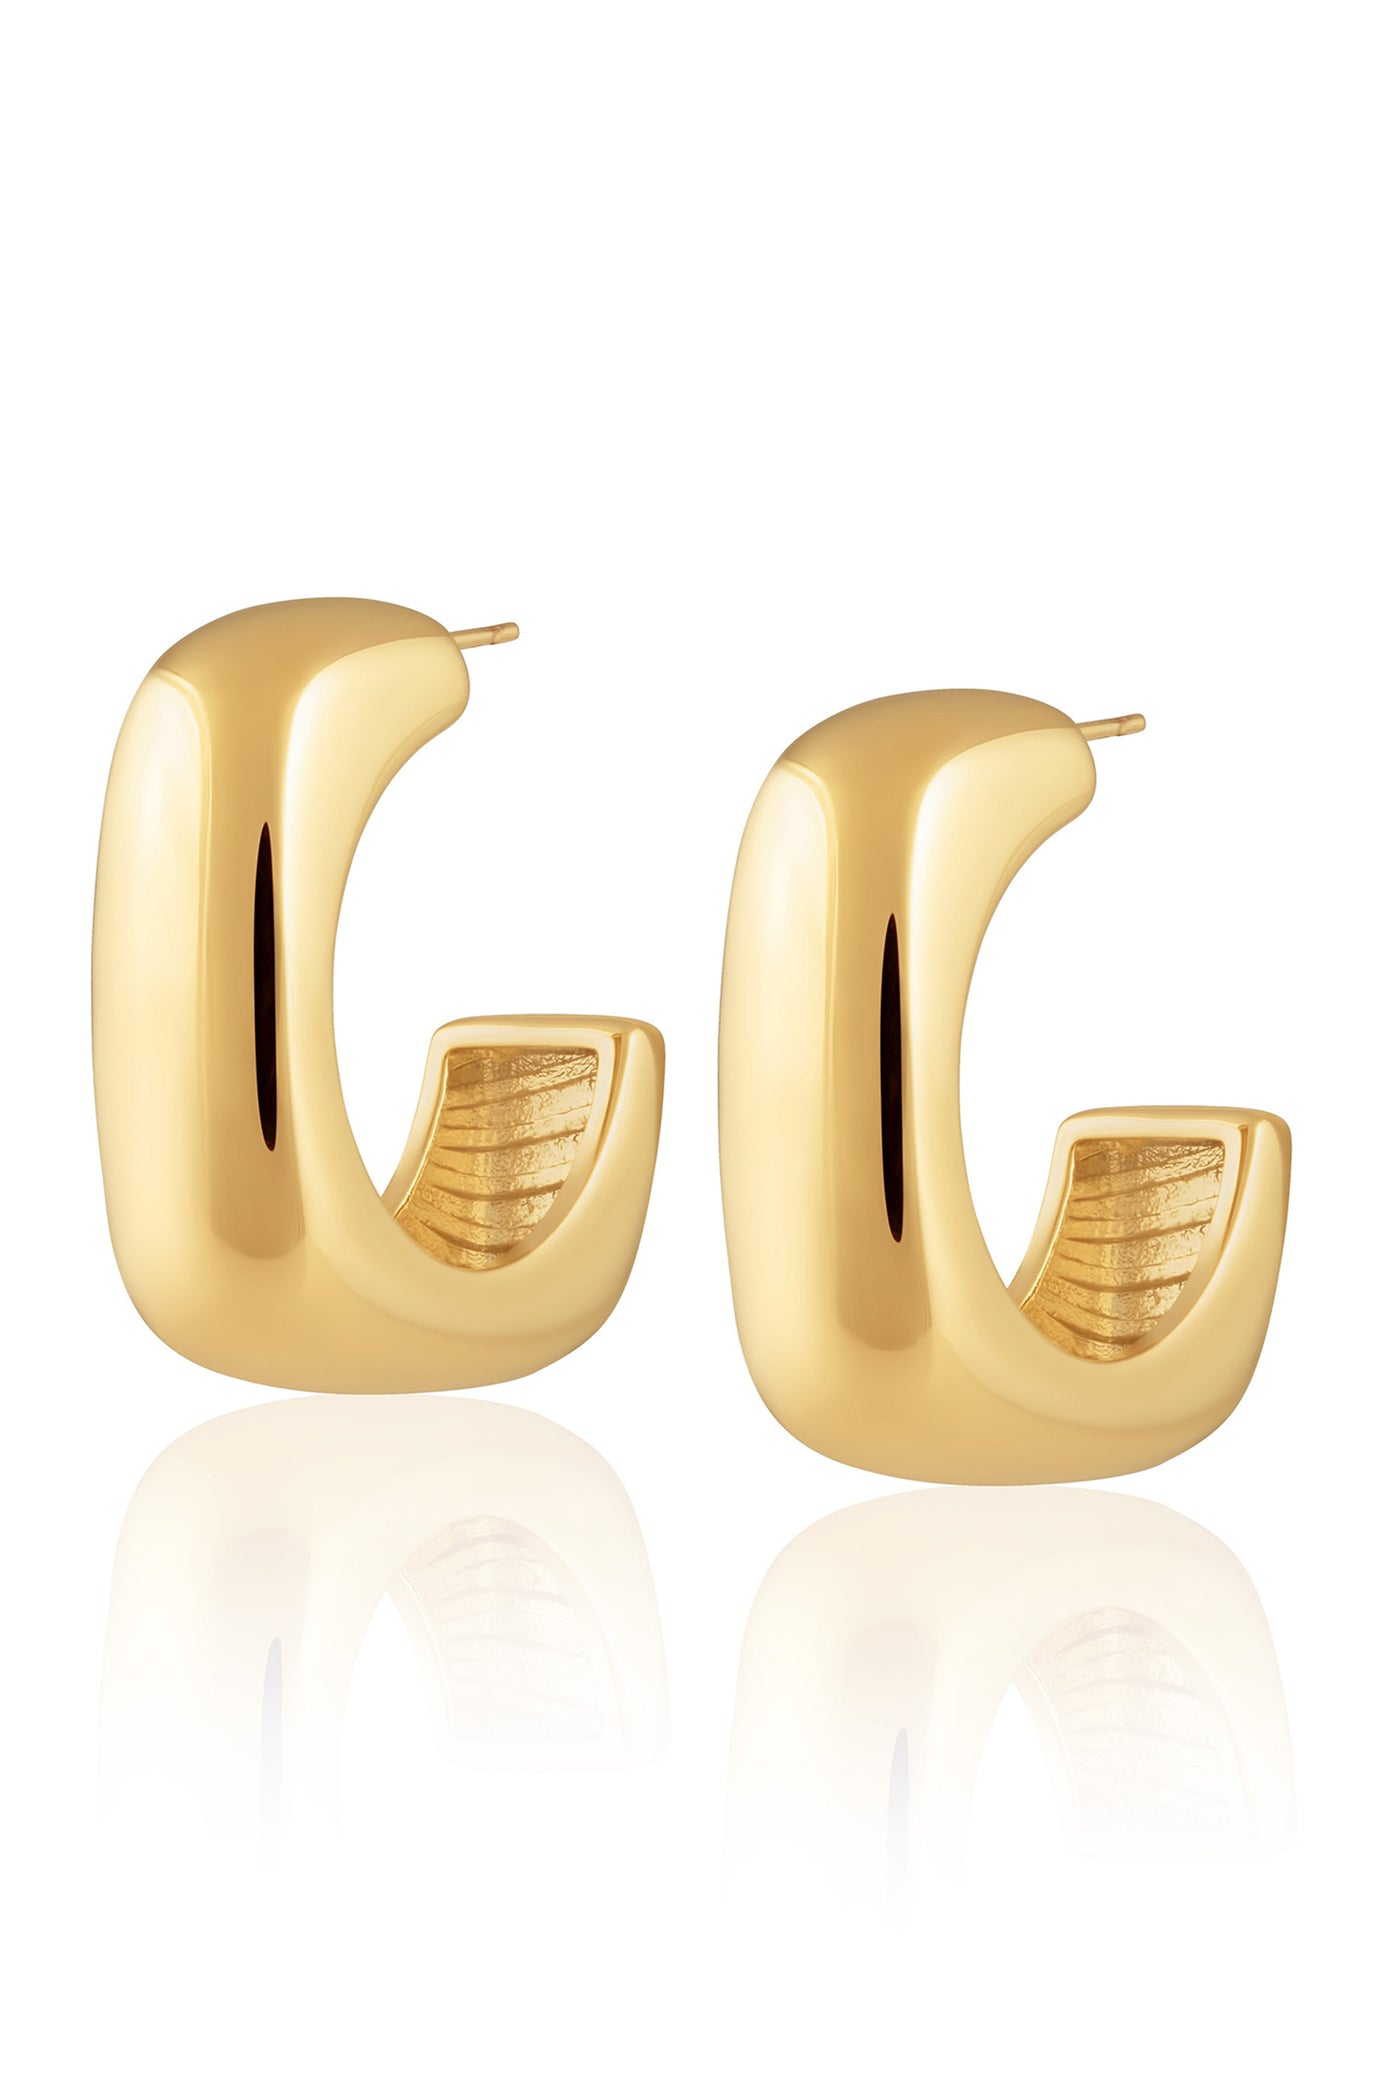 These mini gold hoops are slightly square and slightly rounded are the perfect accessories for everyday modest dresses.